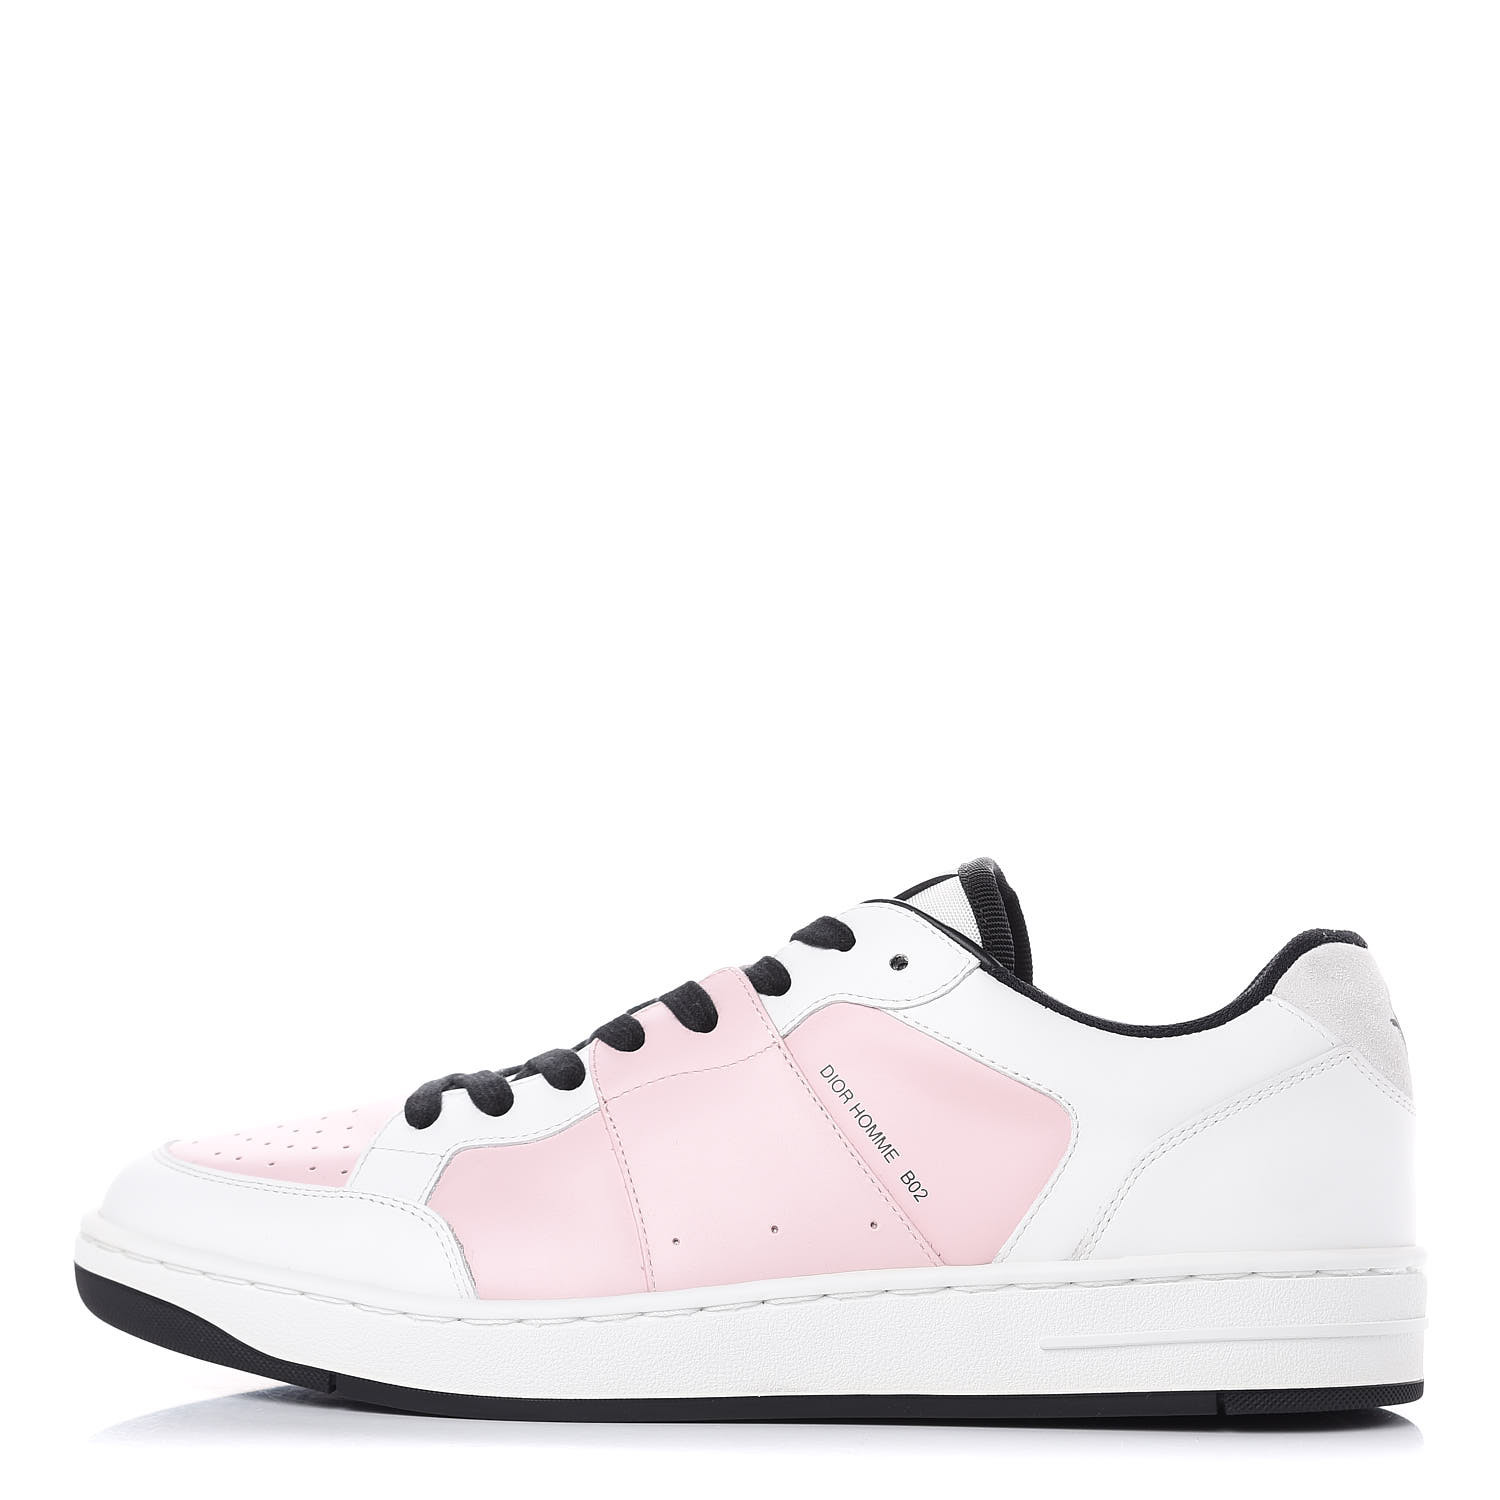 christian dior pink sneakers